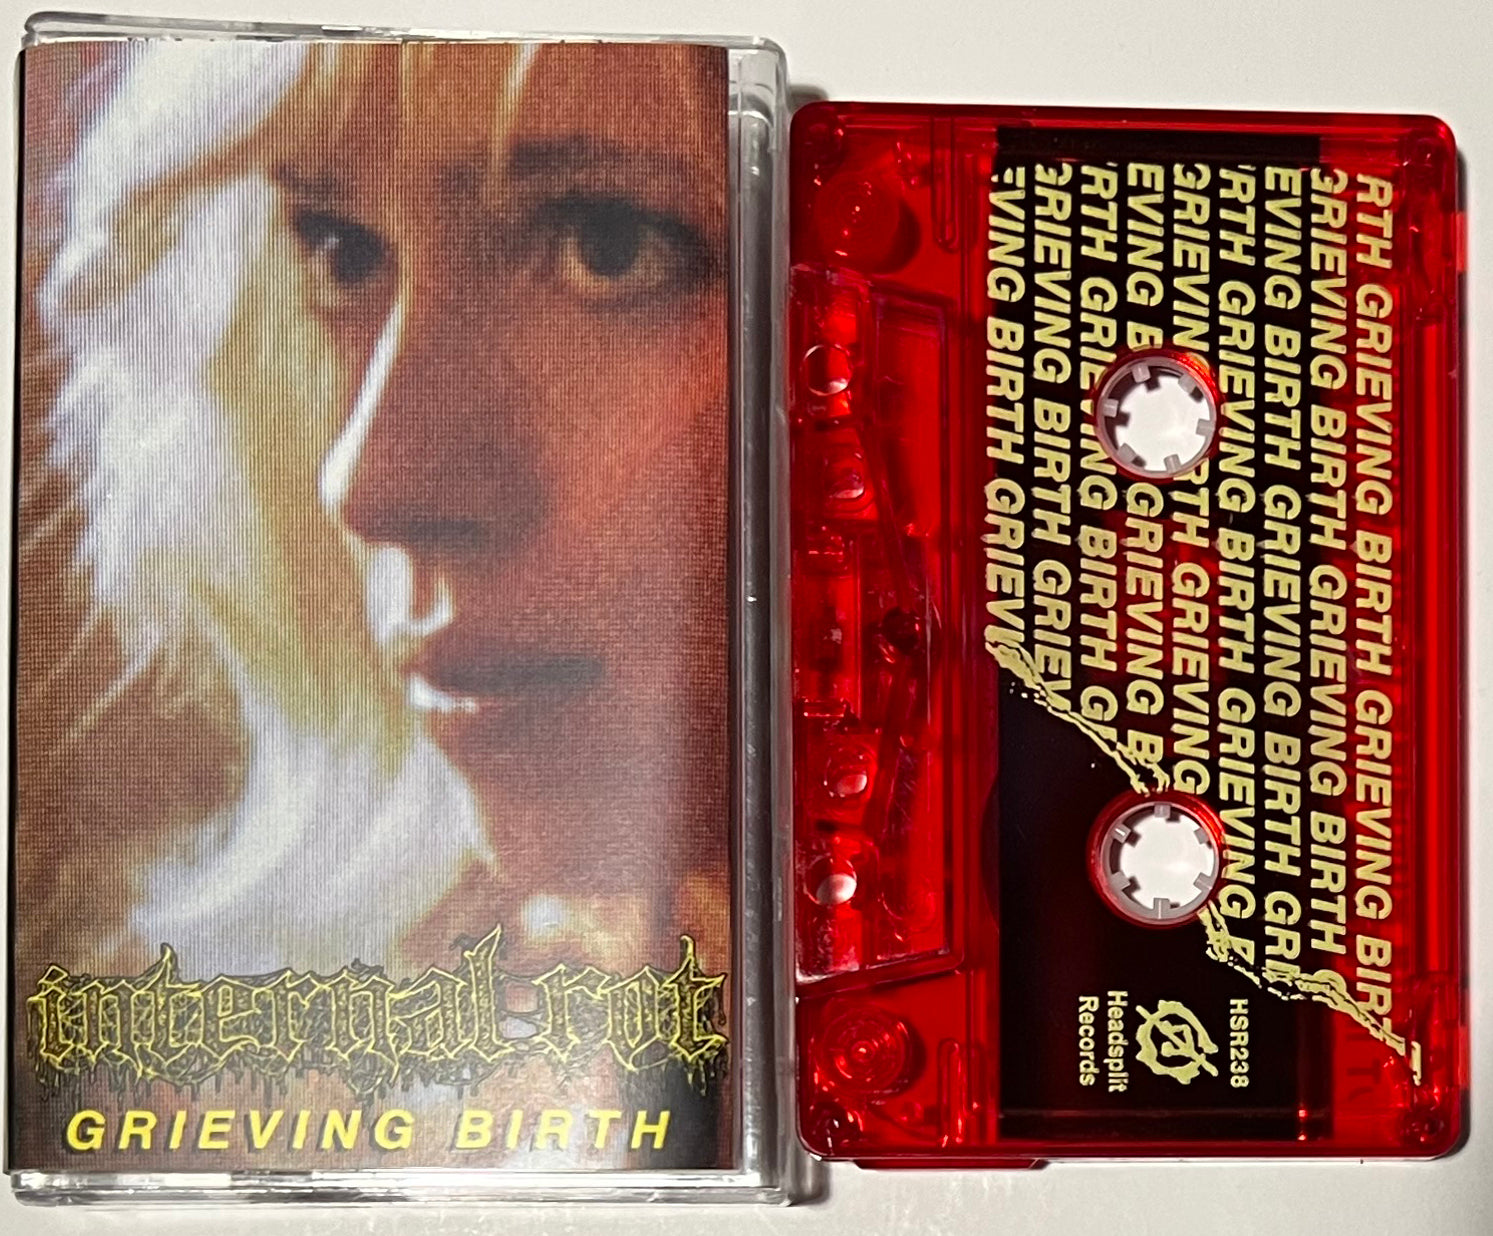 Internal Rot Grieving Birth cassette tape 1st press on Red